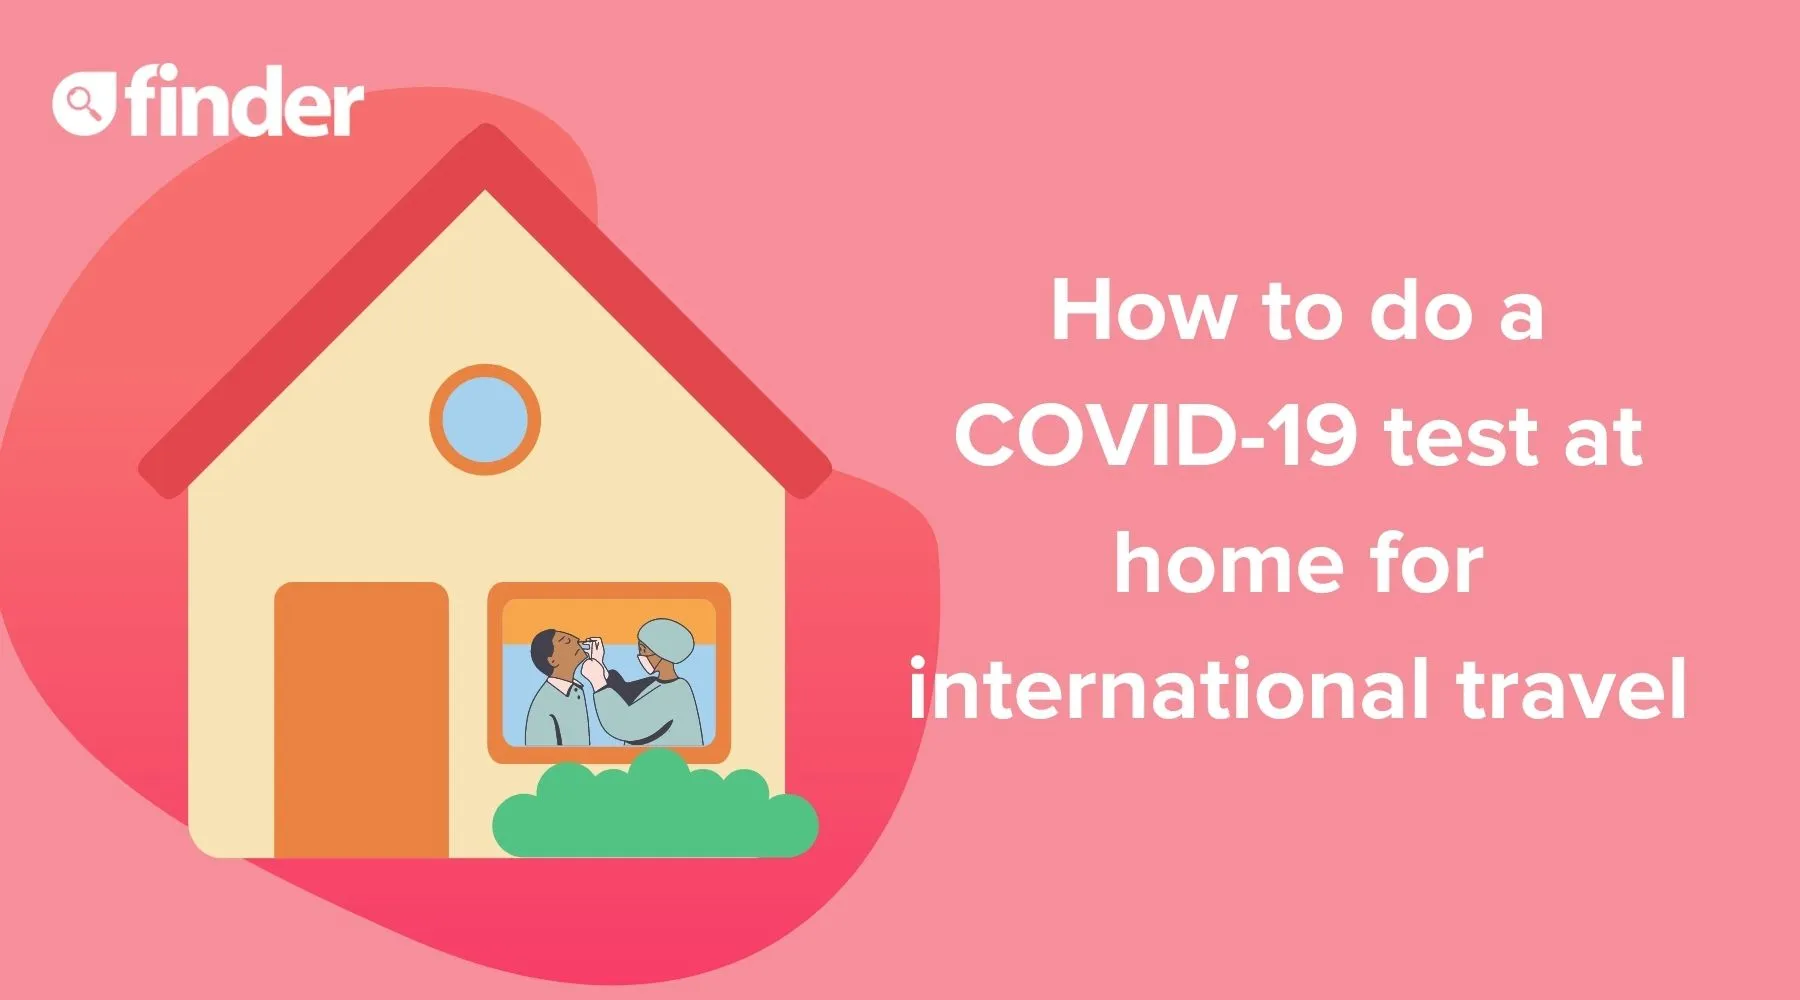 How to do a COVID-19 test at home for international travel